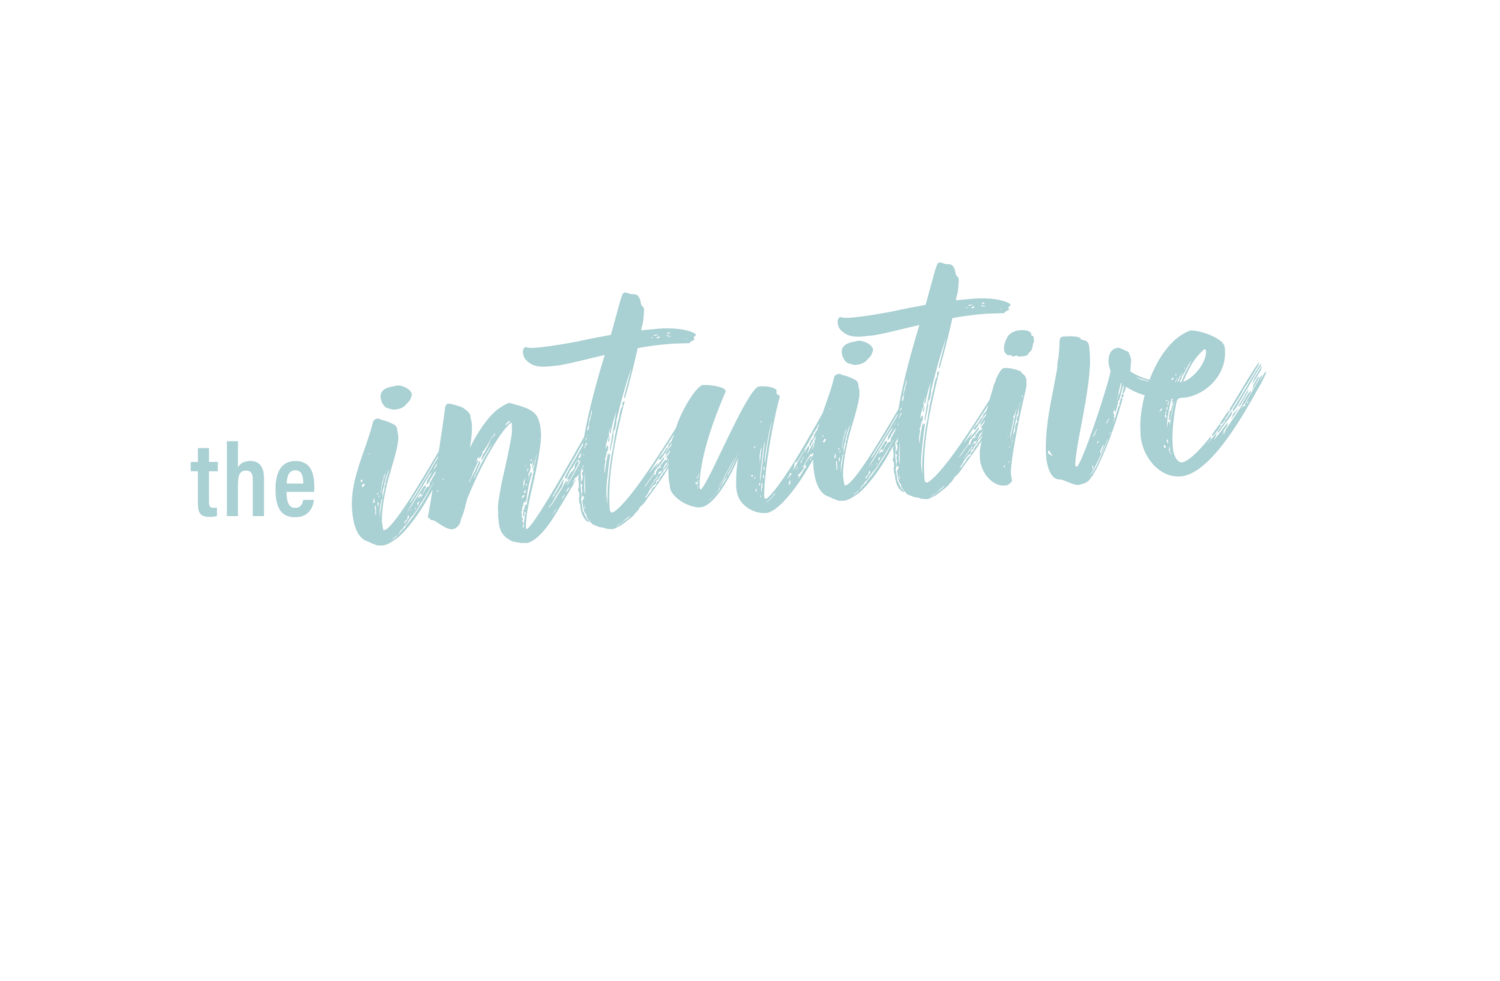 The Intuitive Counselor by Laura B. Farmer